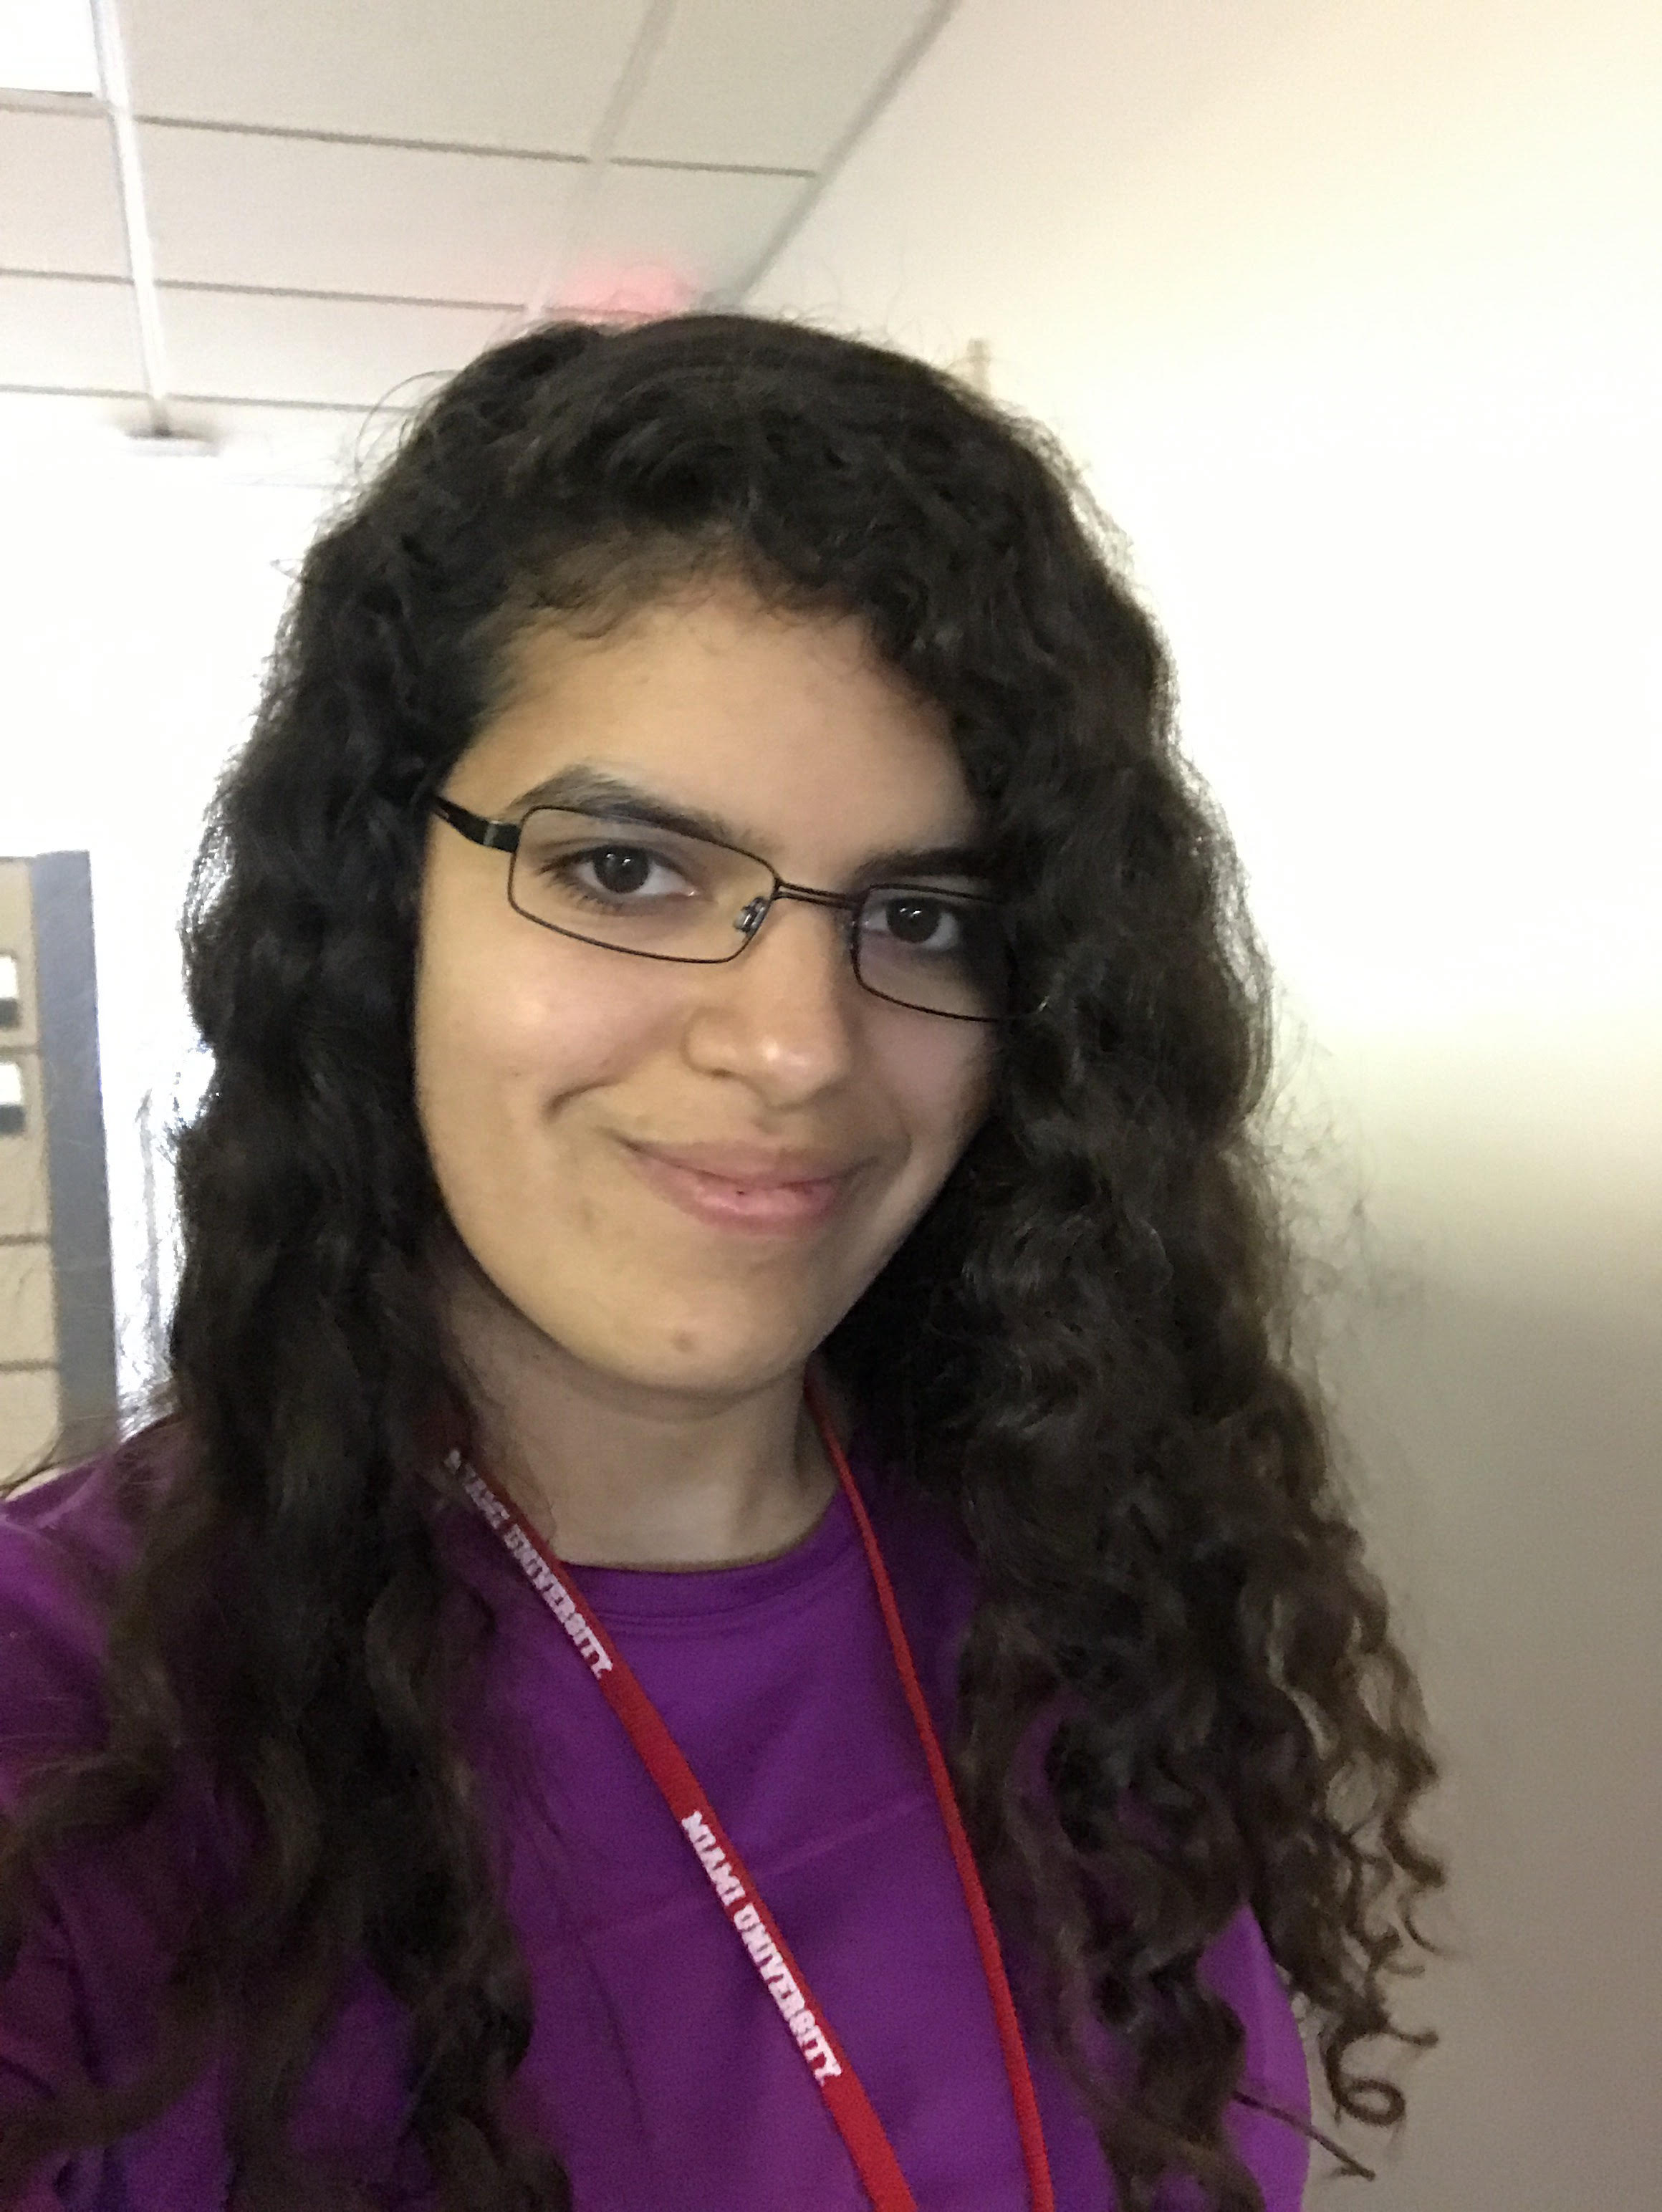 Sofia Olaya wearing a purple shirt, glasses and a red Miami lanyard